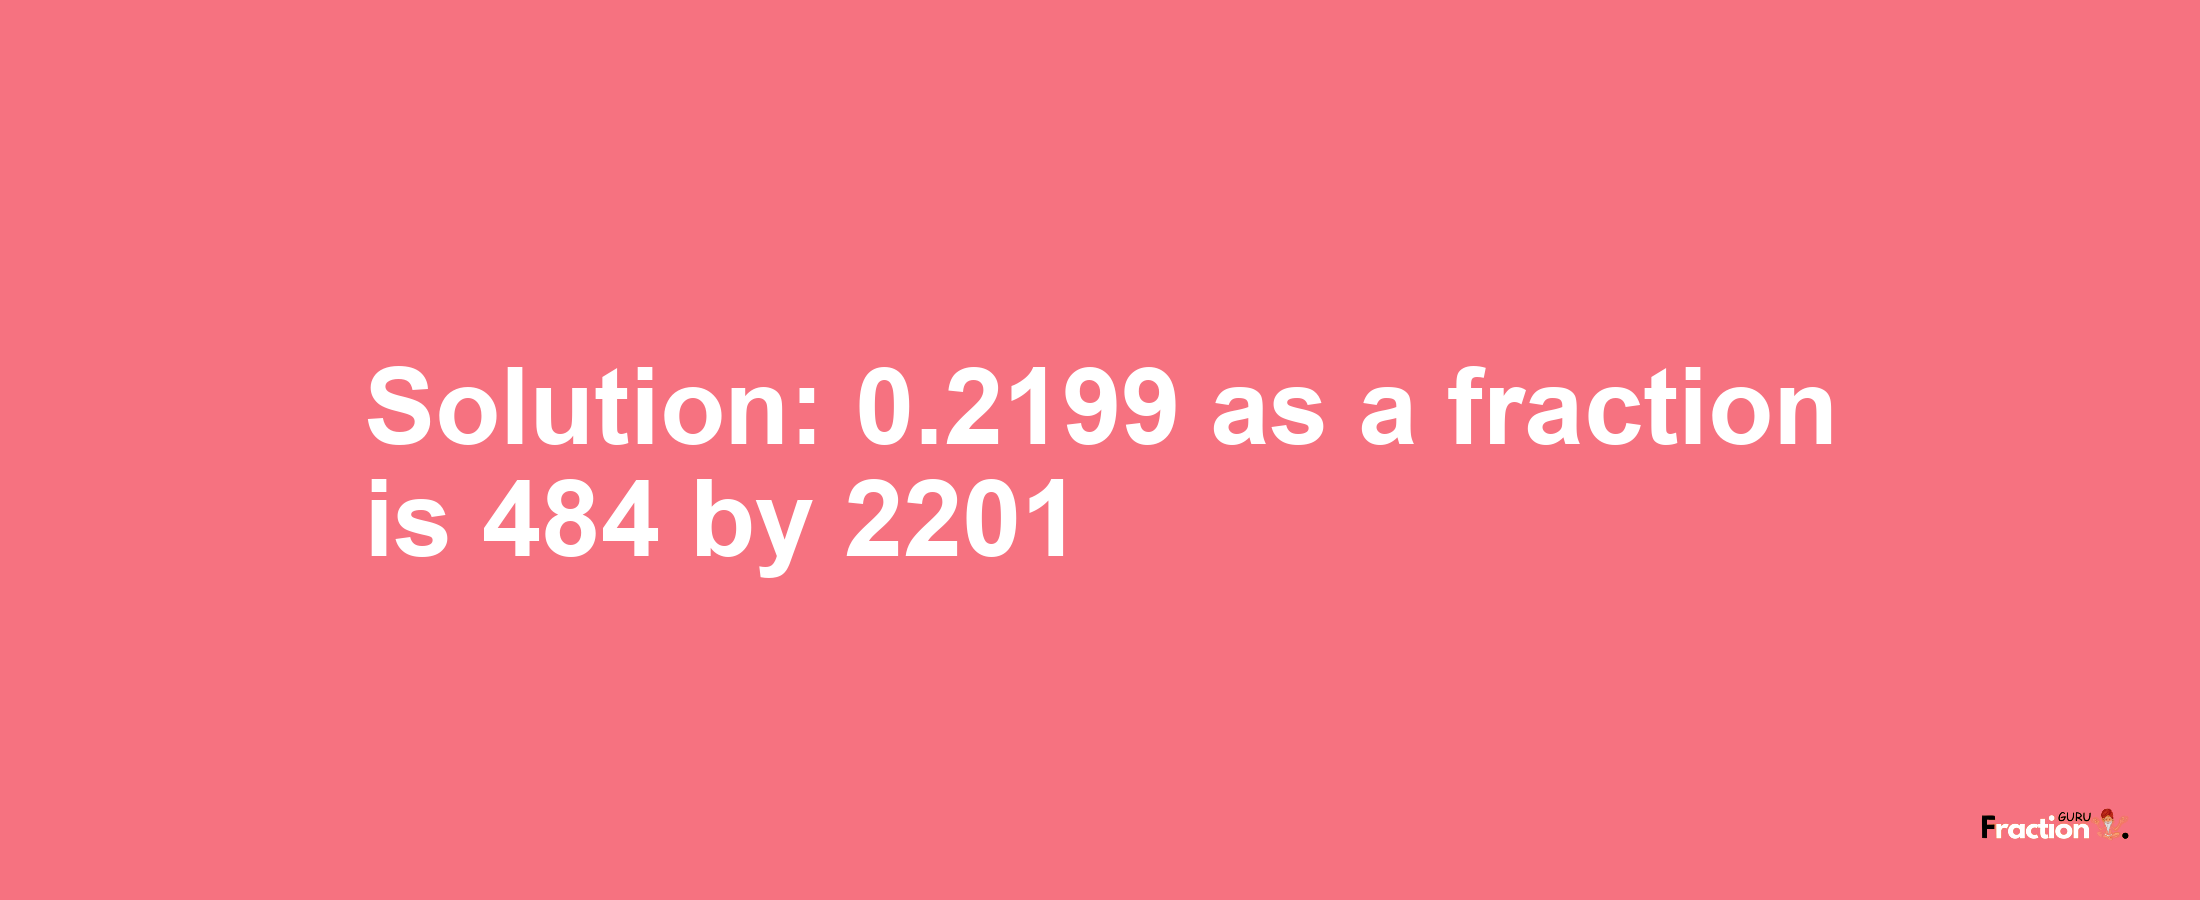 Solution:0.2199 as a fraction is 484/2201